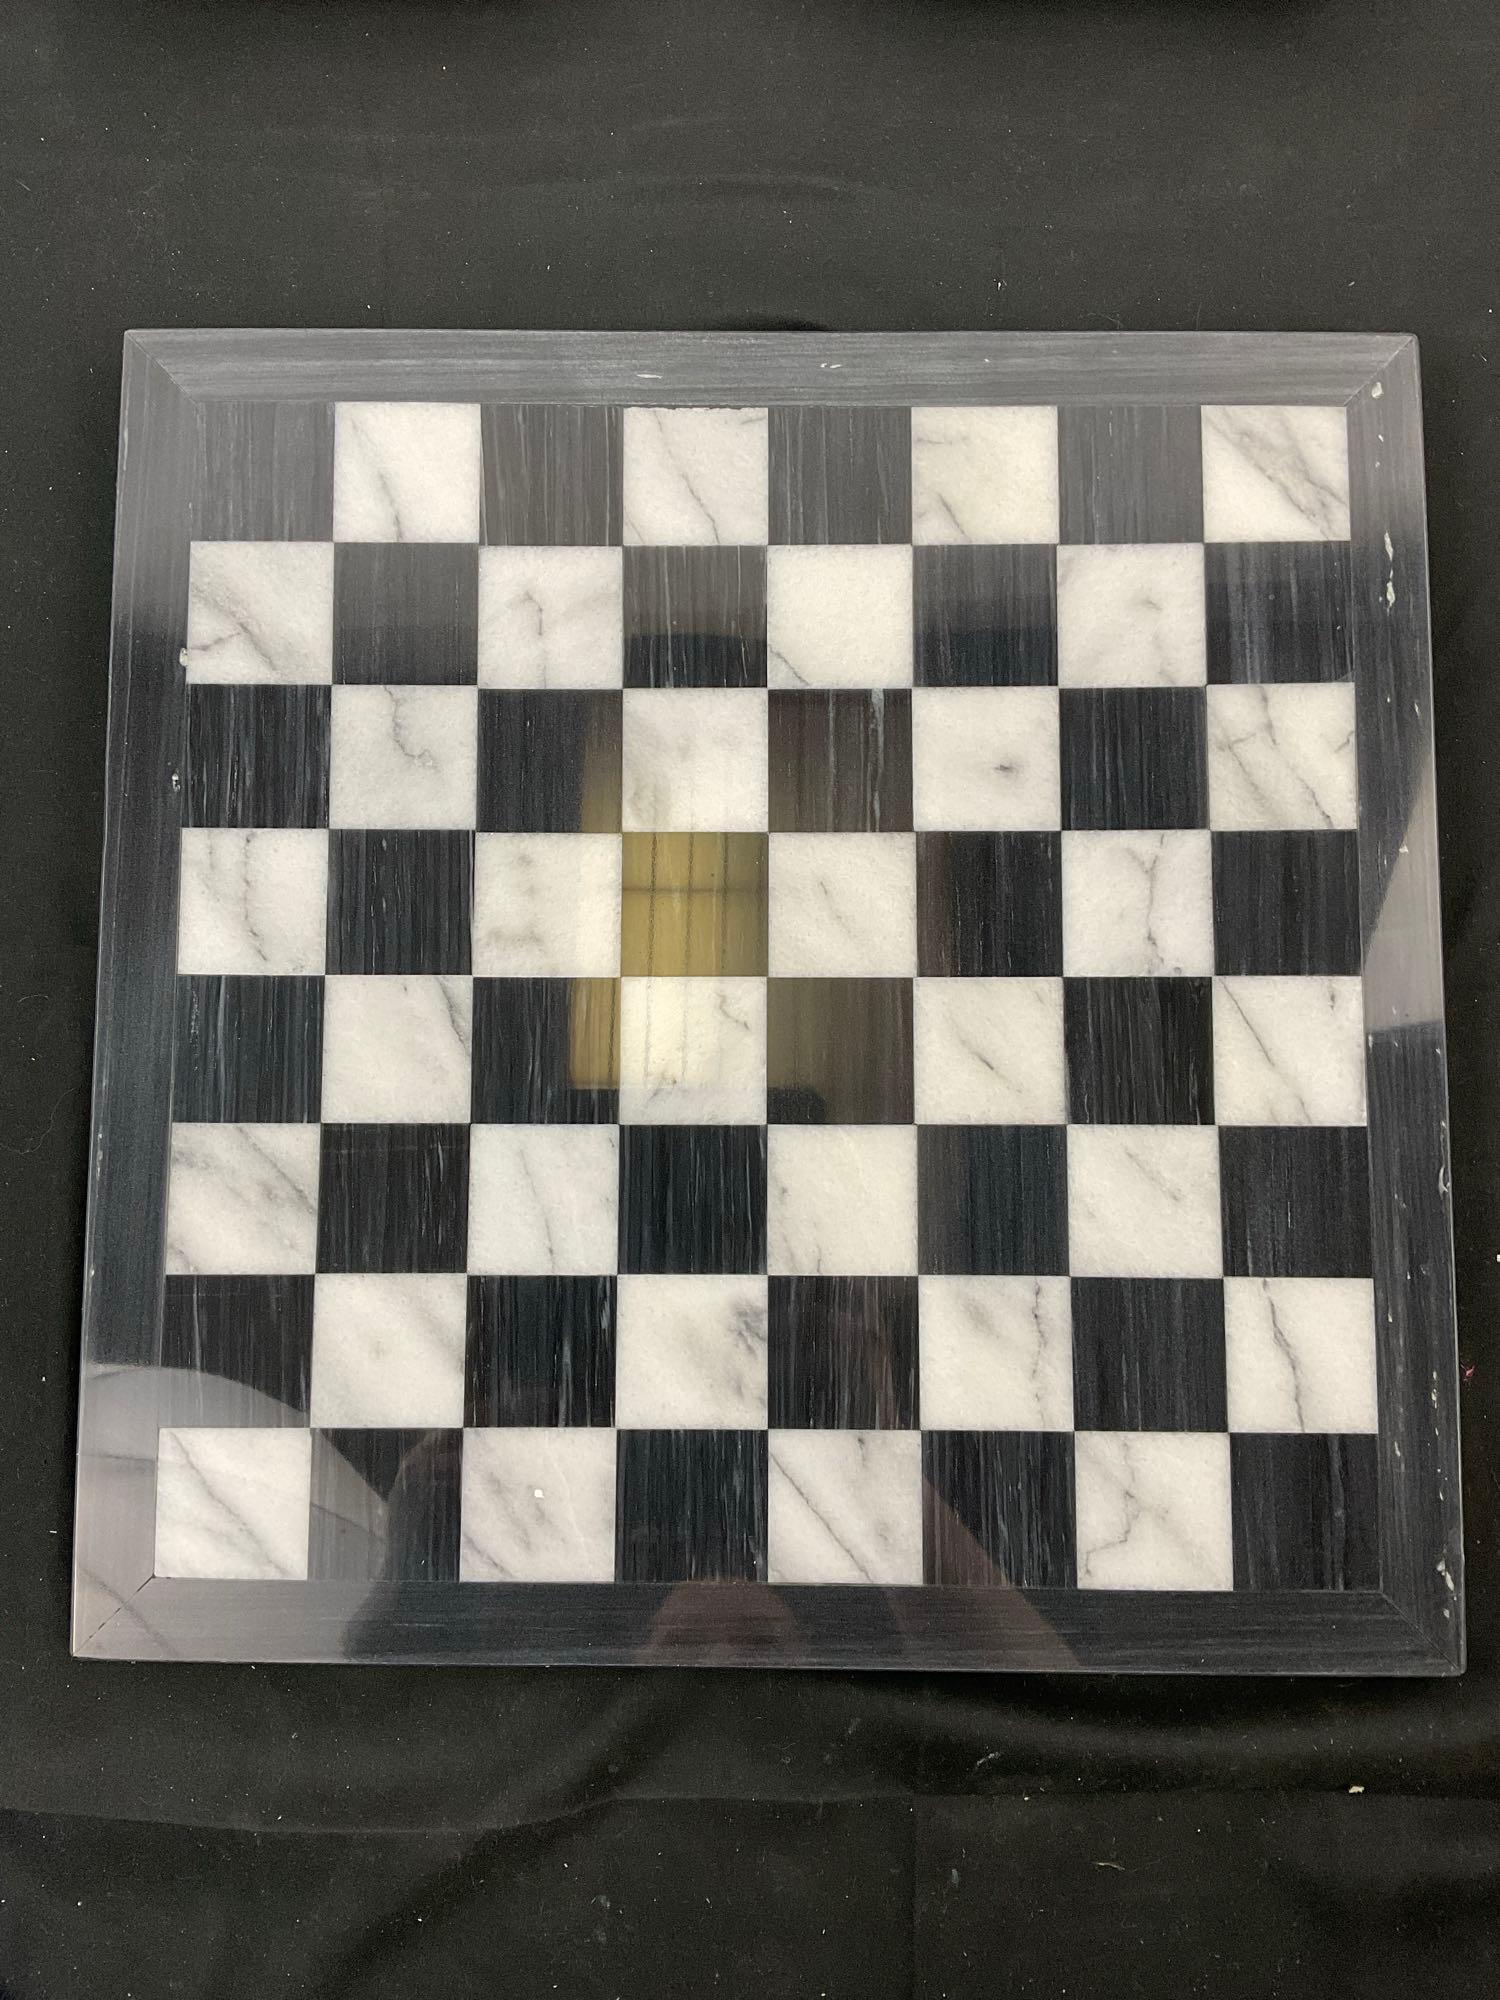 Vintage Deluxe Black & White Marble Chess Set. All Pieces Present. Condition is Excellent. NIB. See